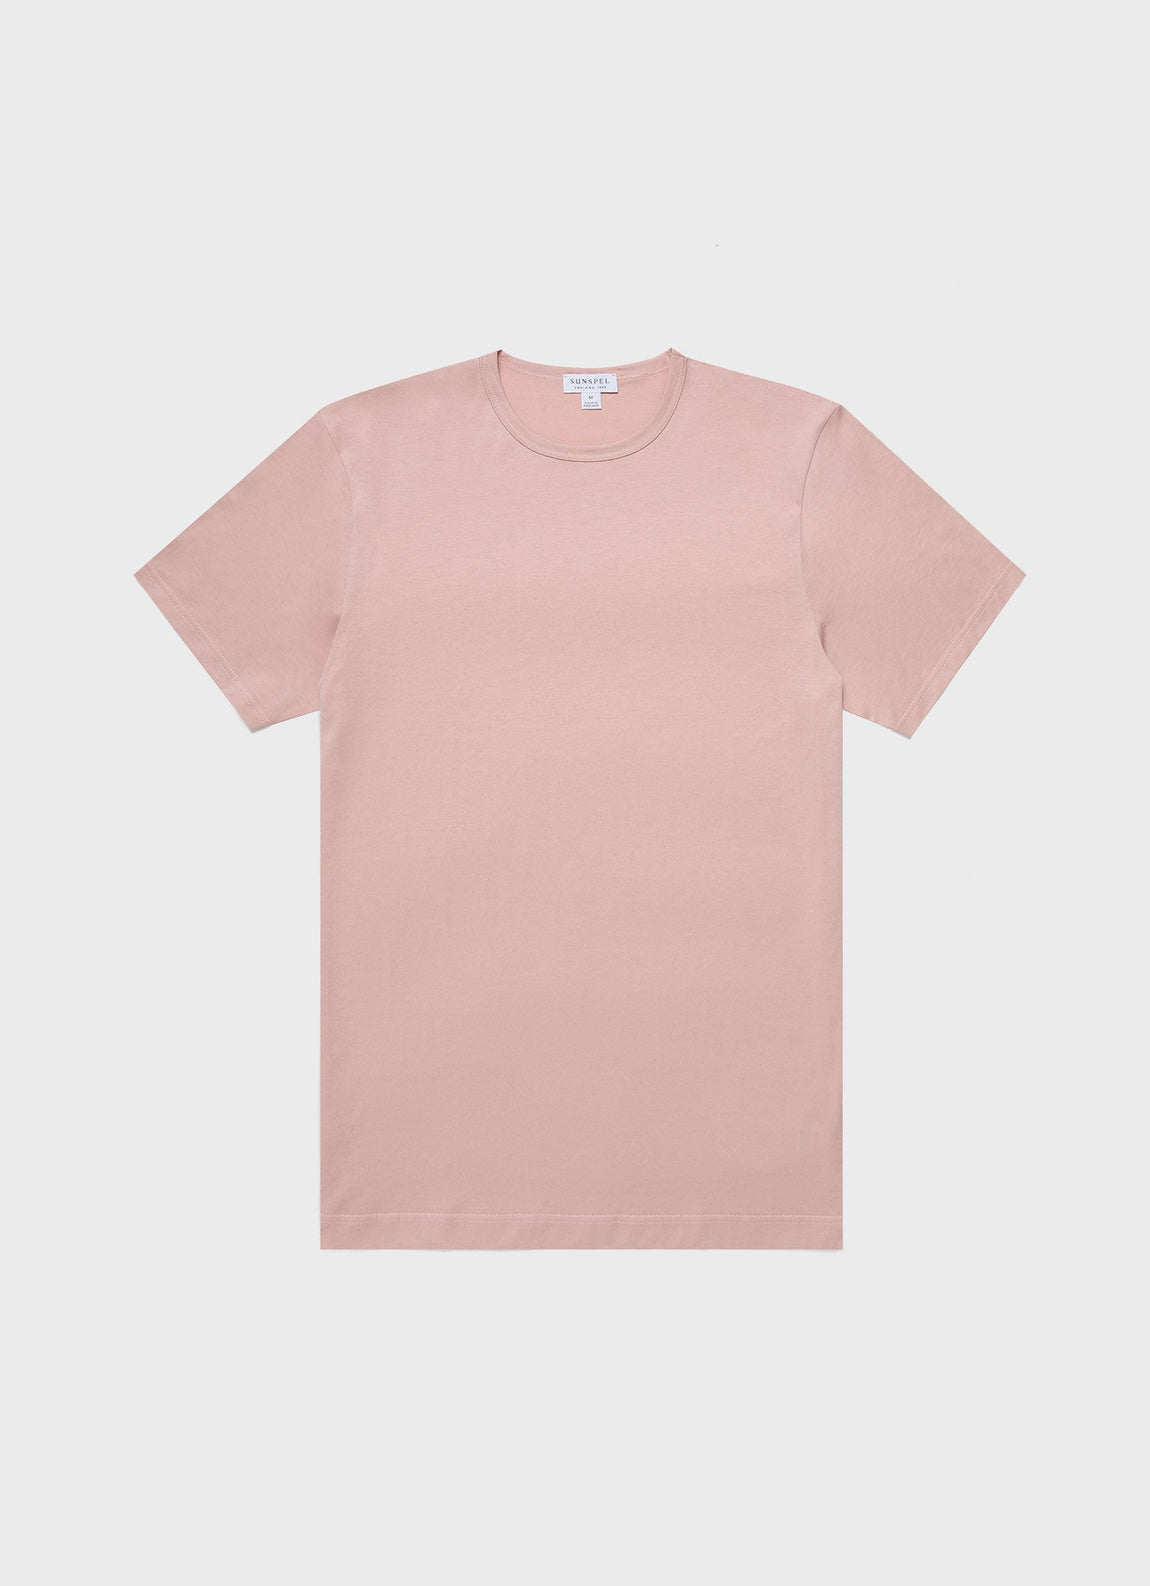 Men's Classic T-shirt in Shell Pink